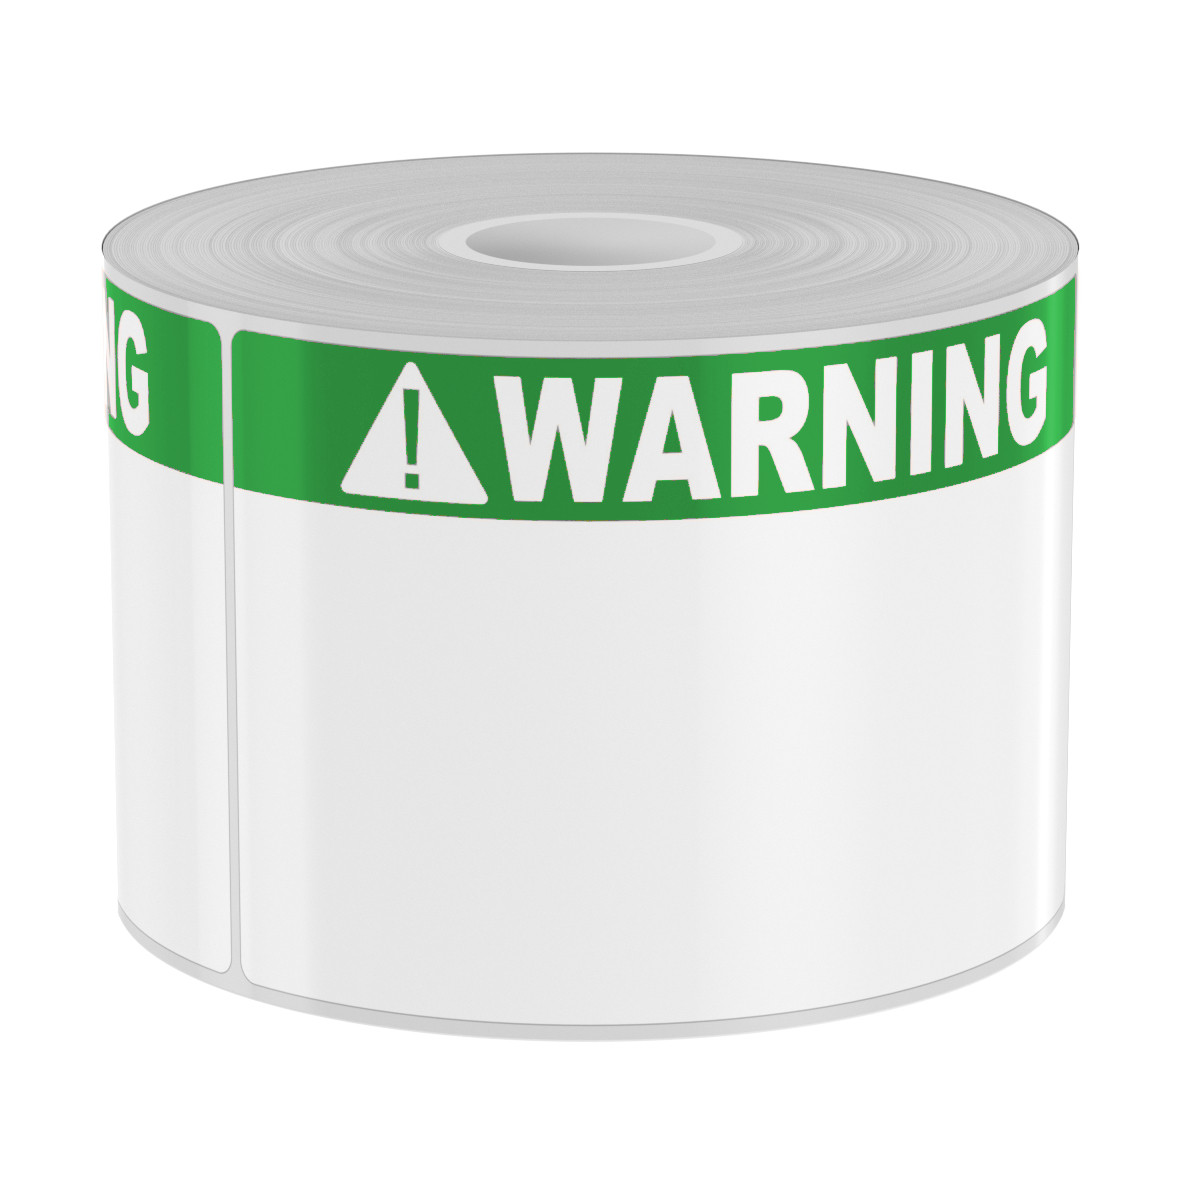 Detail view for 250 3" x 5" High-Performance Die-Cut Green Band White Warning